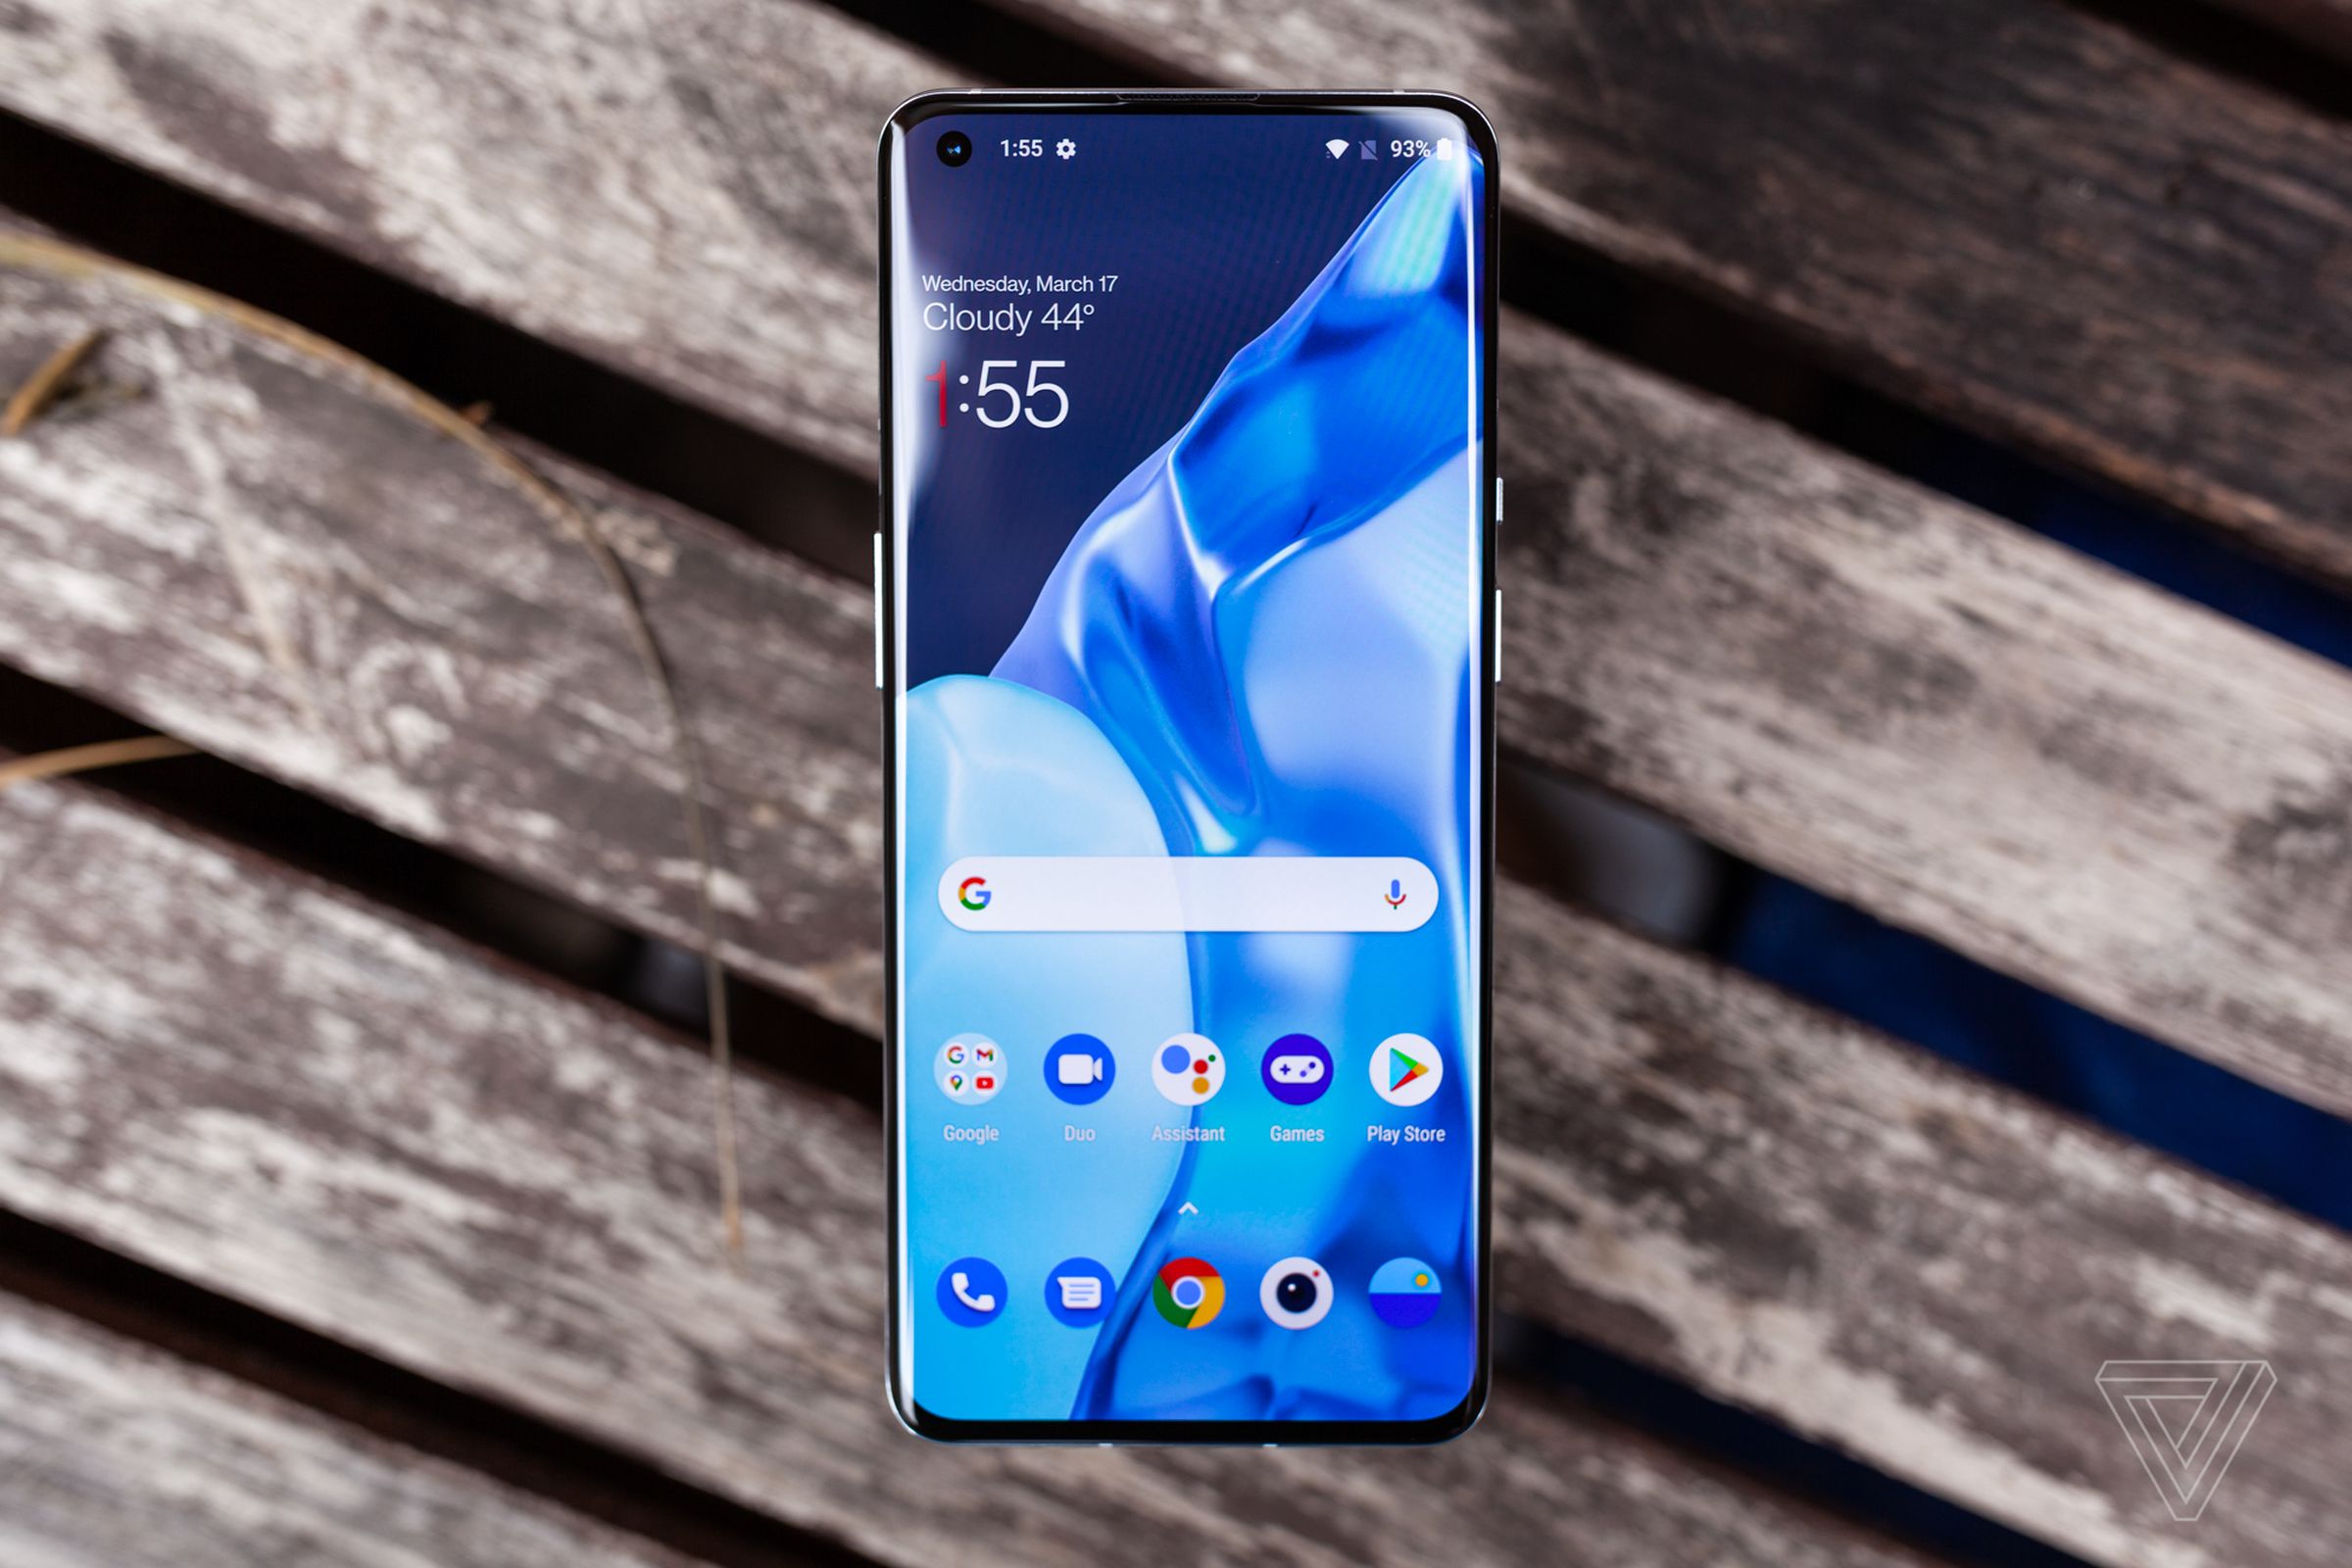 The OnePlus 9 Pro has an elegant design, but won’t support 5G on all networks